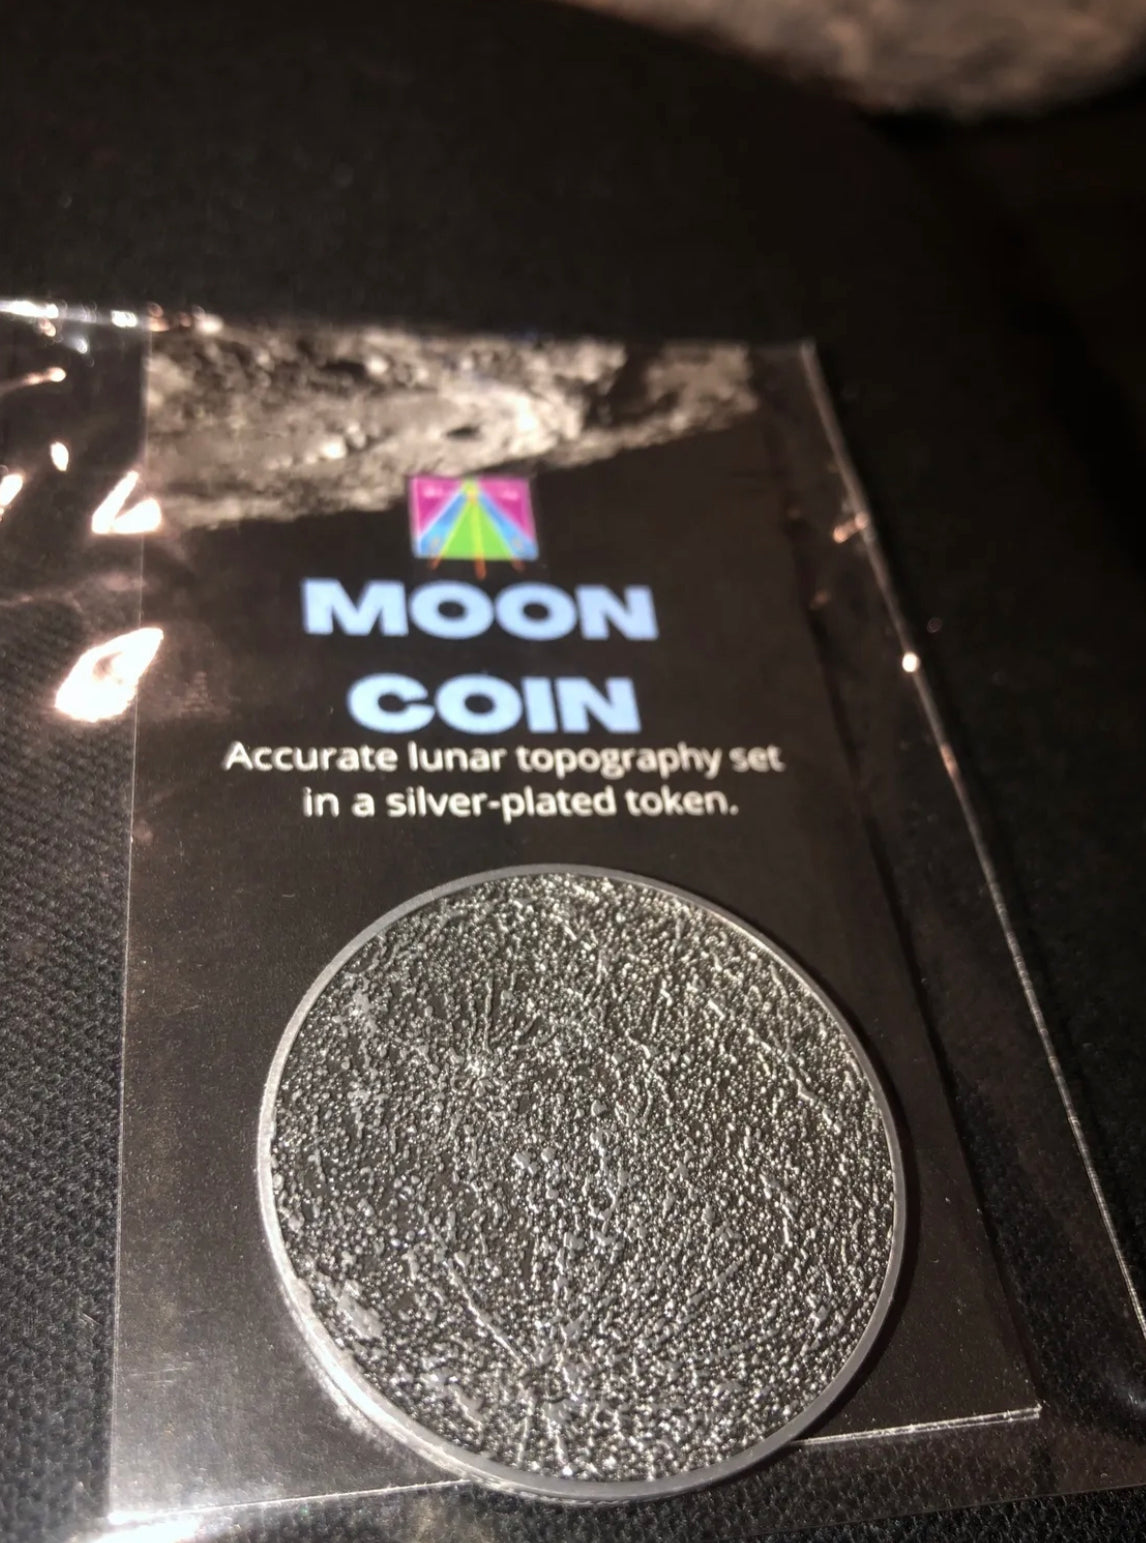 Collectible Interstellar Collection Silver Plated Moon Coin with Accurate Topography